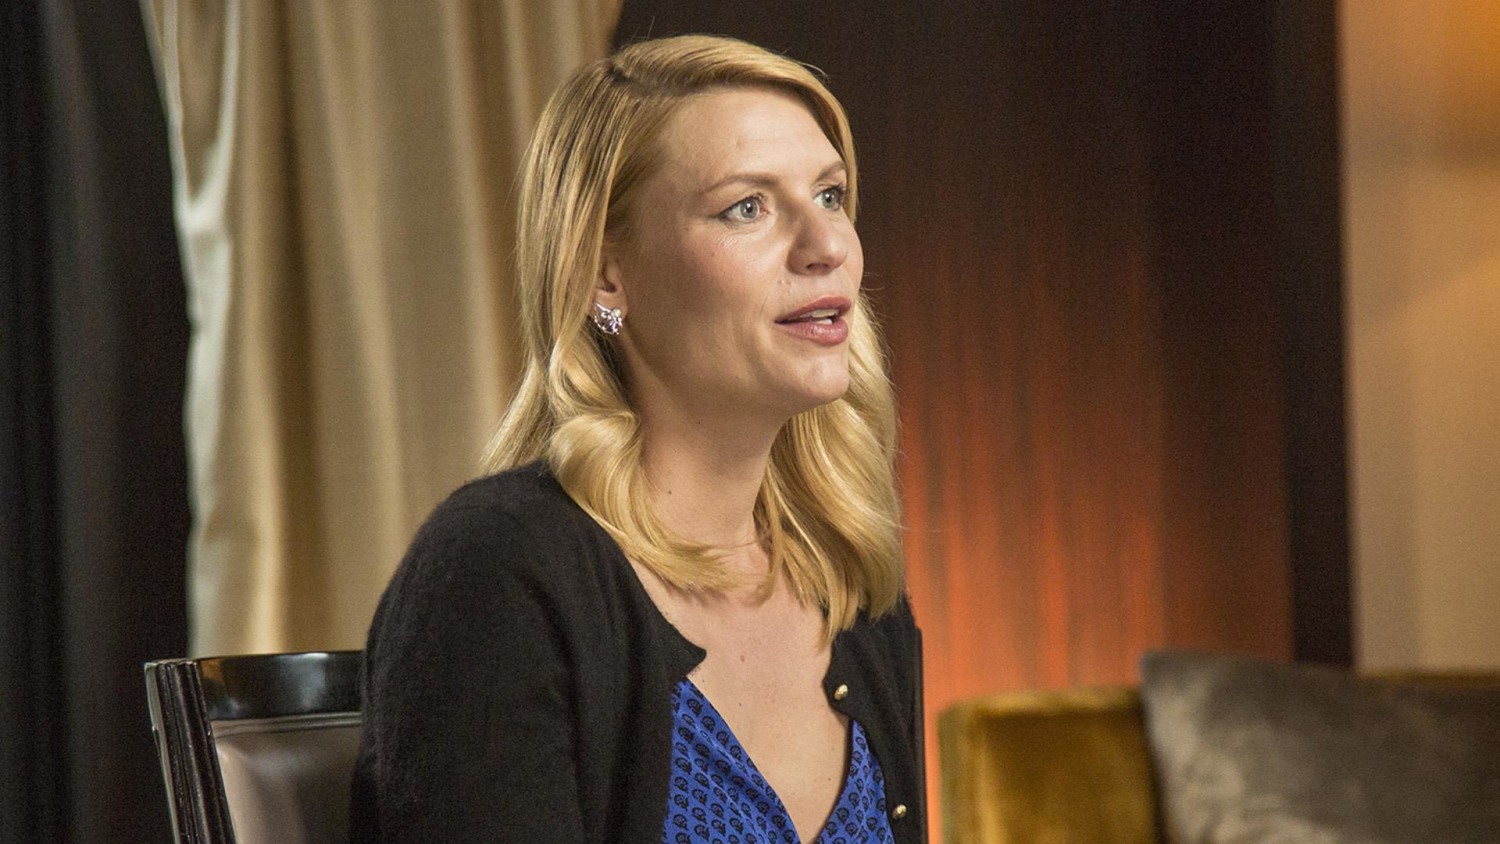 Claire Danes On Her 'Homeland Run': 'I'm Filled With Gratitude' : NPR